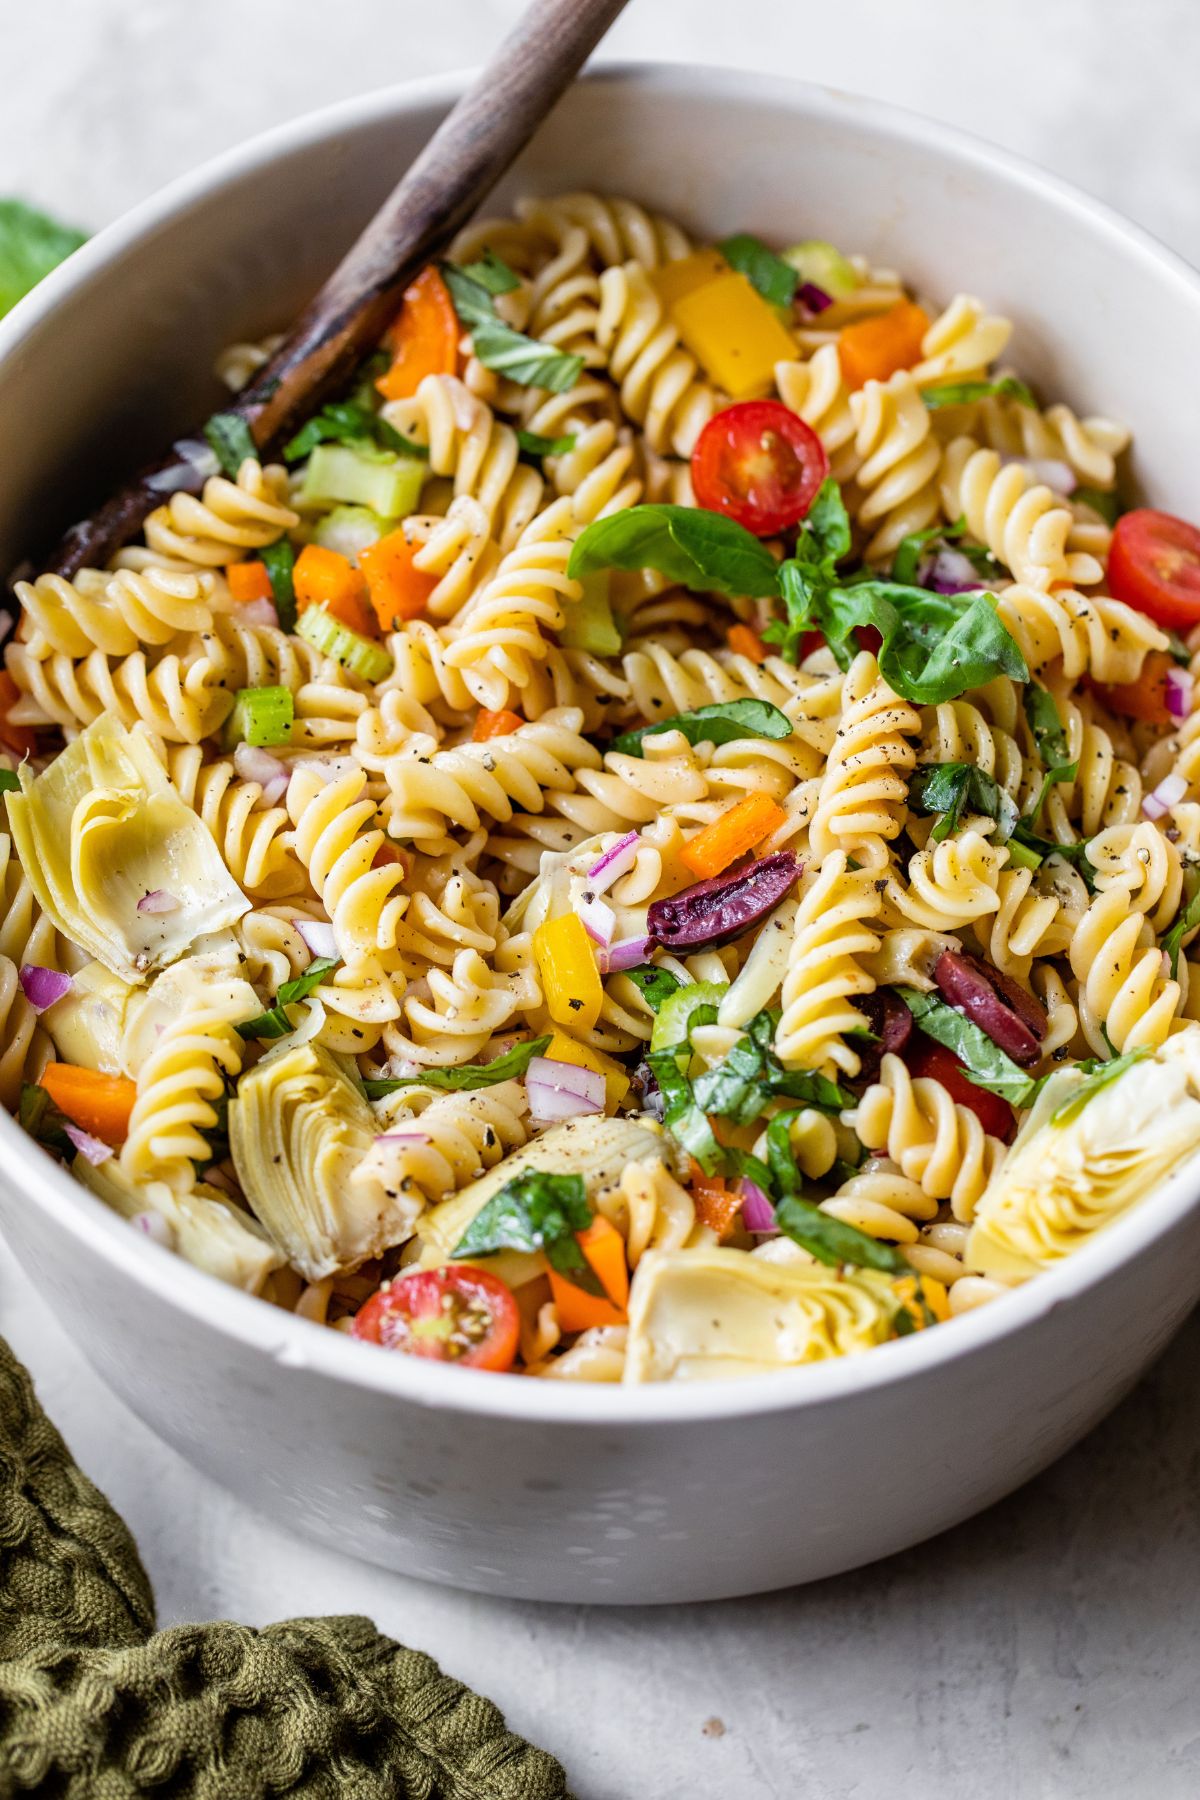 Pasta mixed with veggies in a large bowl.